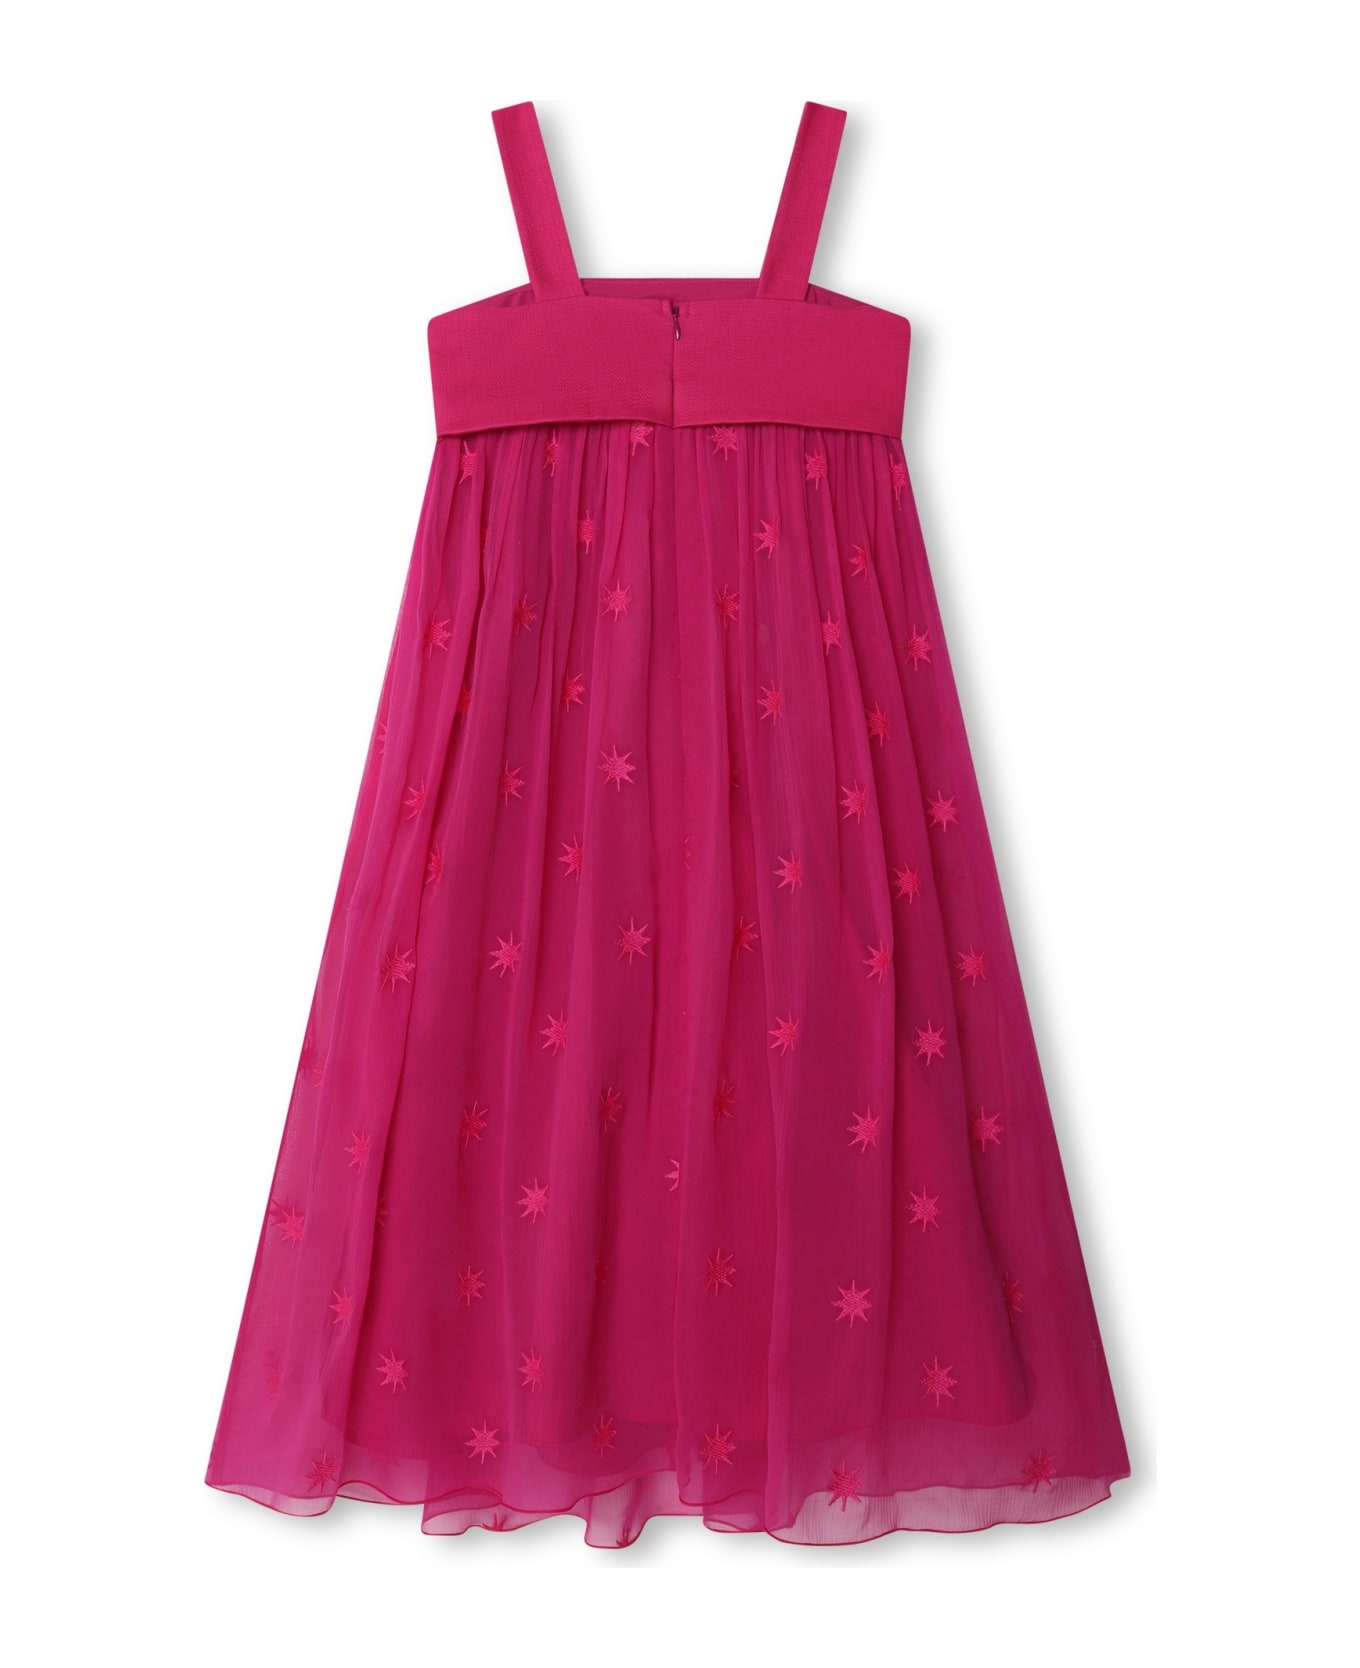 Chloé Abito In Tulle - Pink ワンピース＆ドレス